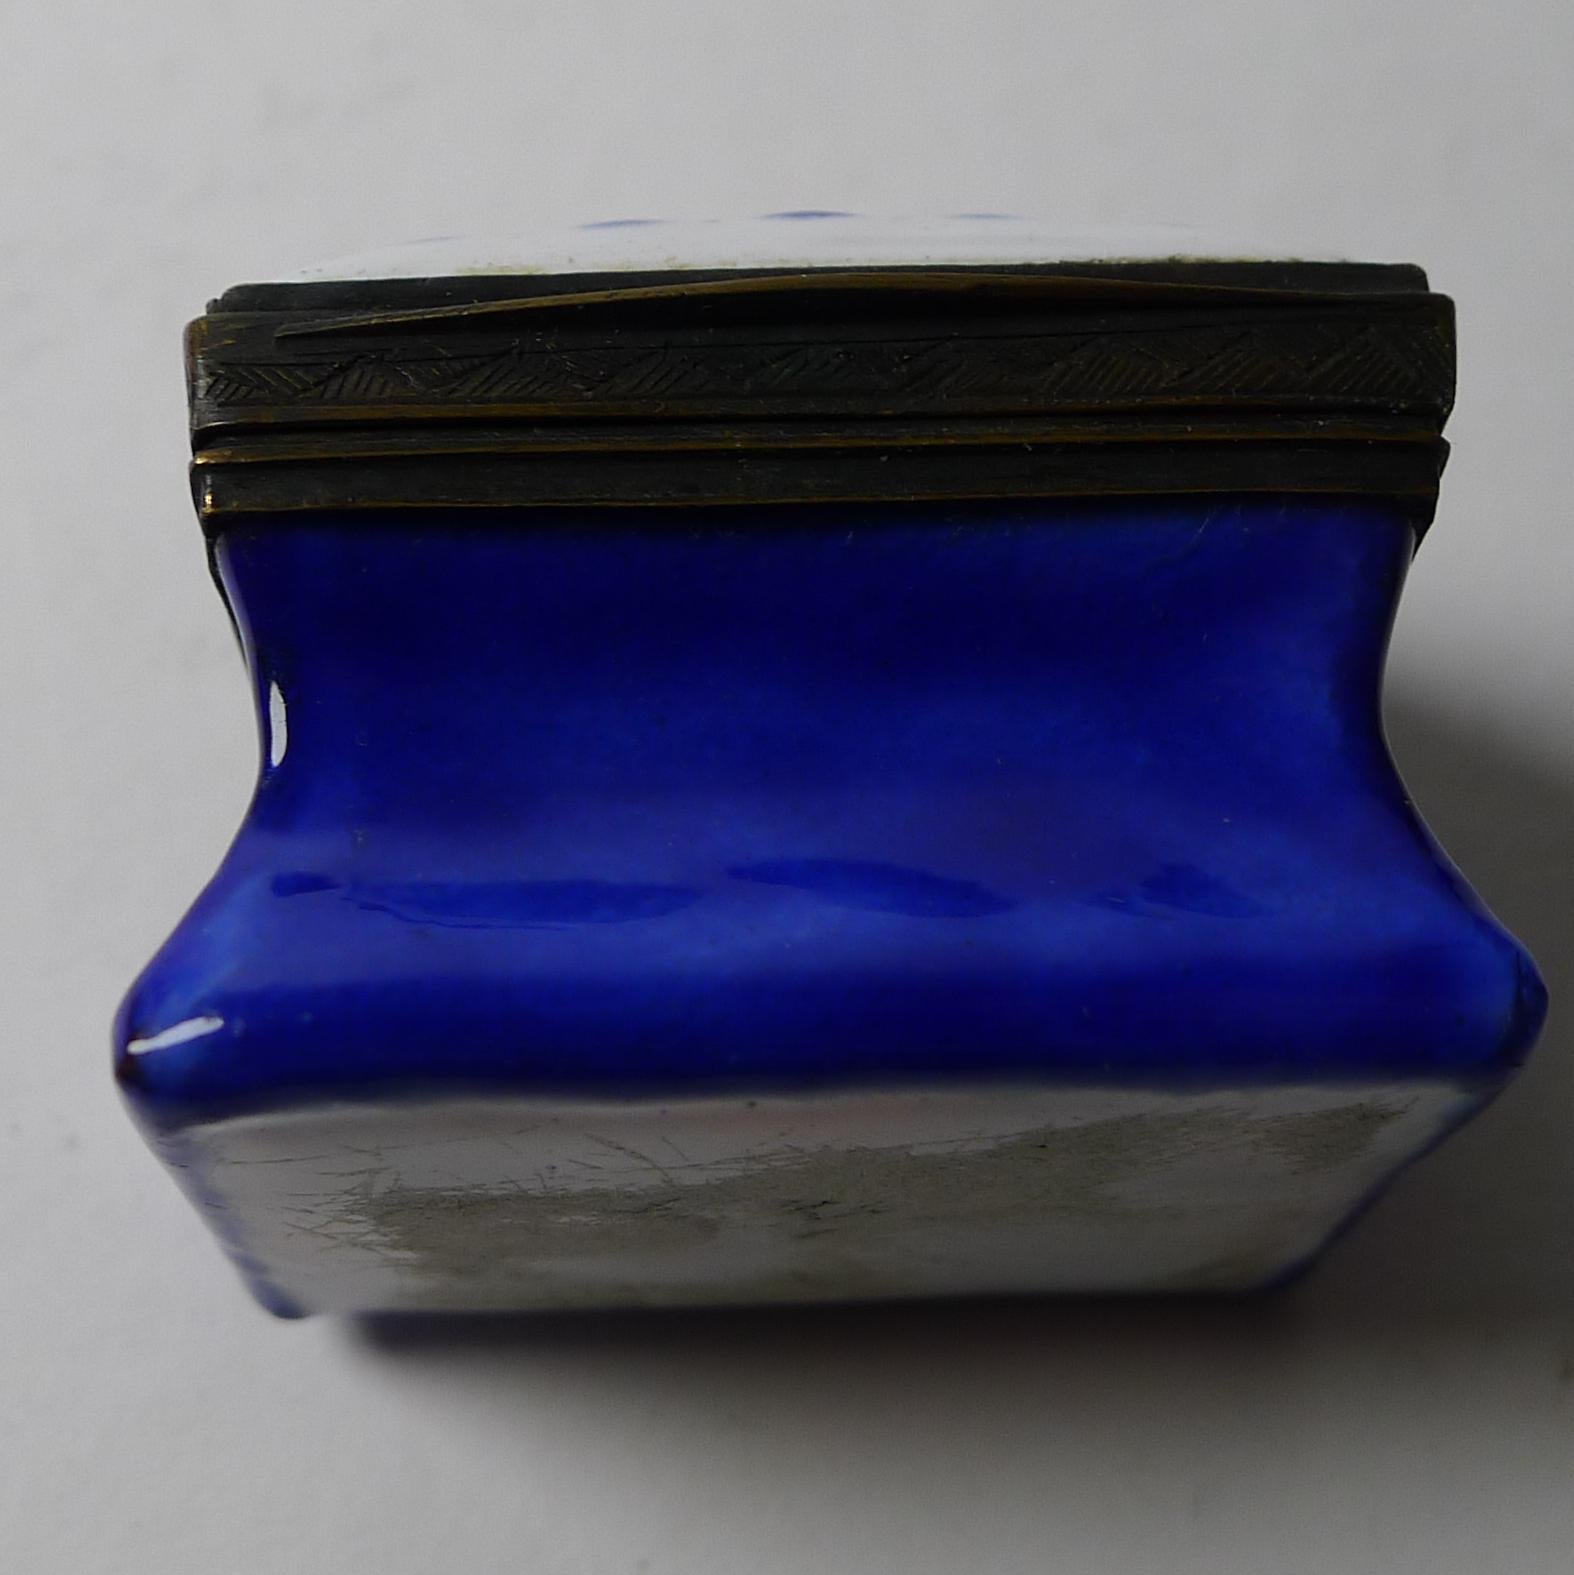 A truly fine example of an 18th century South Staffordshire Bilston Enamel Patch Box. Made circa 1760.

Beautifully made on a rich blue ground and white interior. Motto on hinged cover reads 